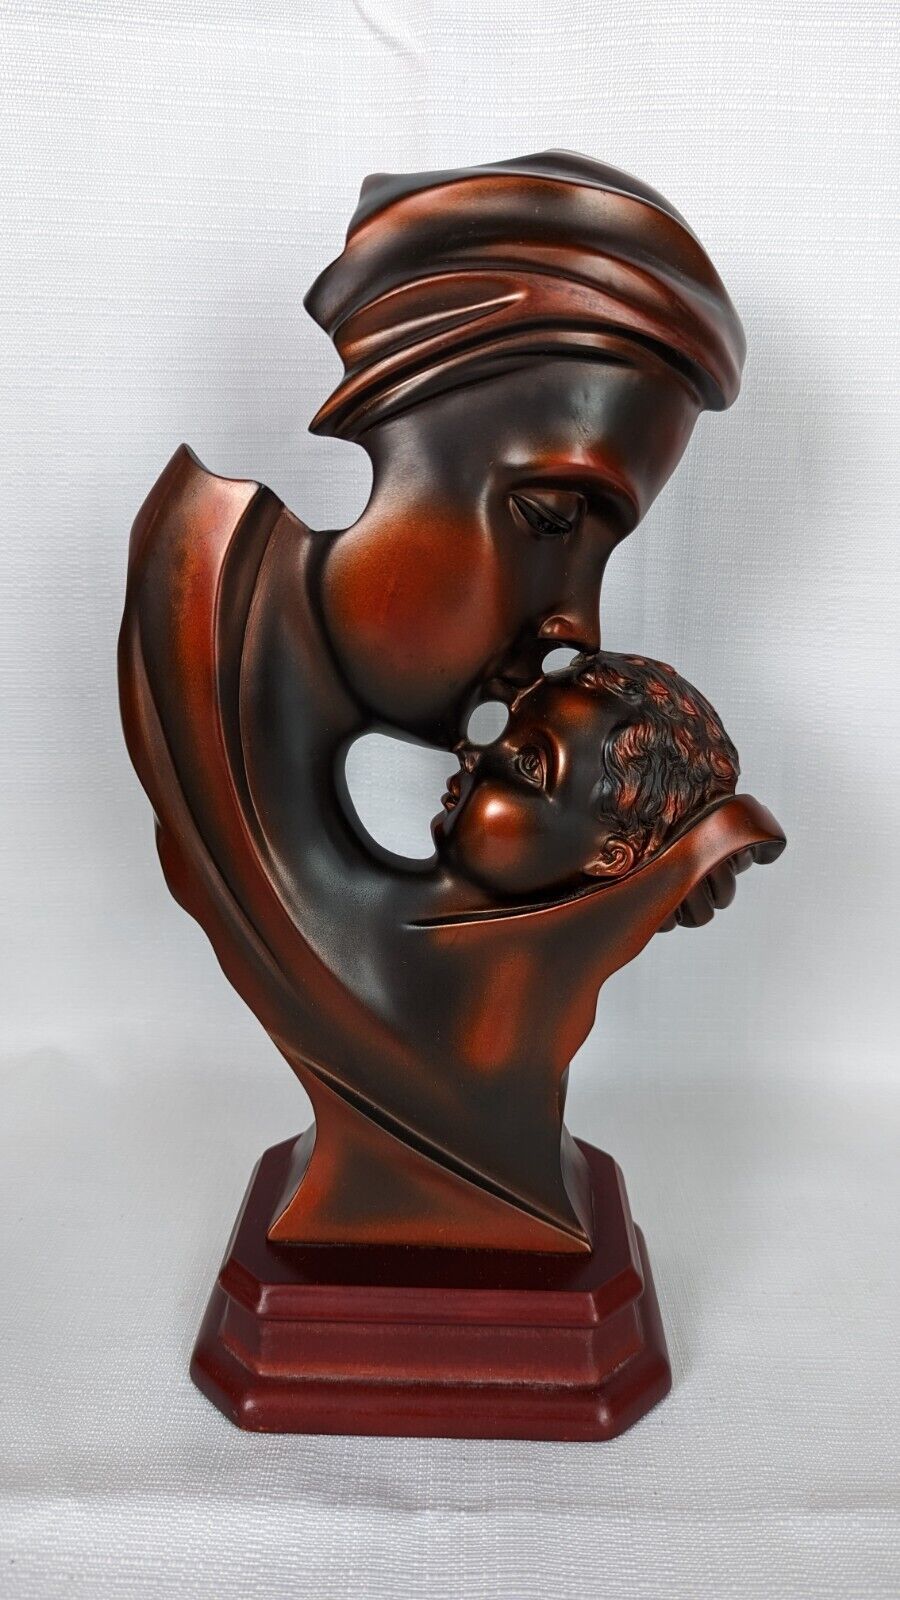 Vintage statue by Herco gift of a mother and child In a beautiful bronze color